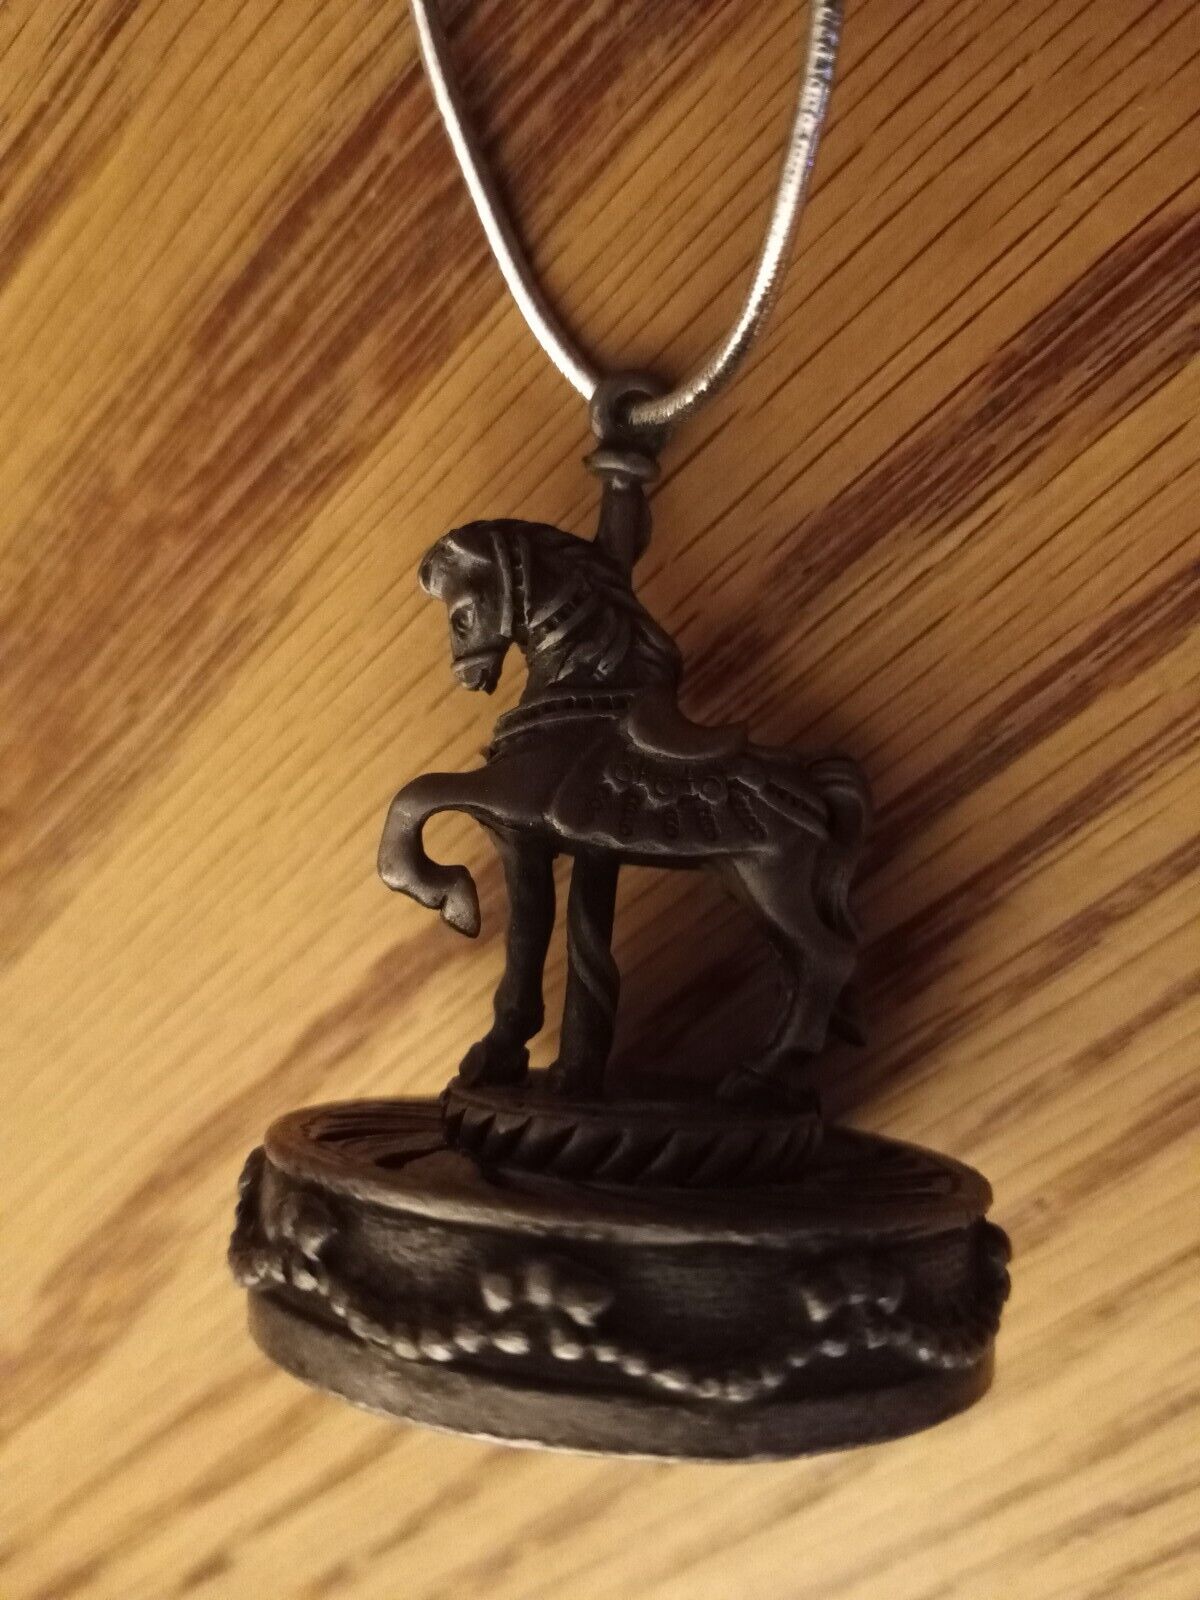 Vintage 1991 Pewter Carousel Horse Christmas Ornament by Nancy Birdsong Small